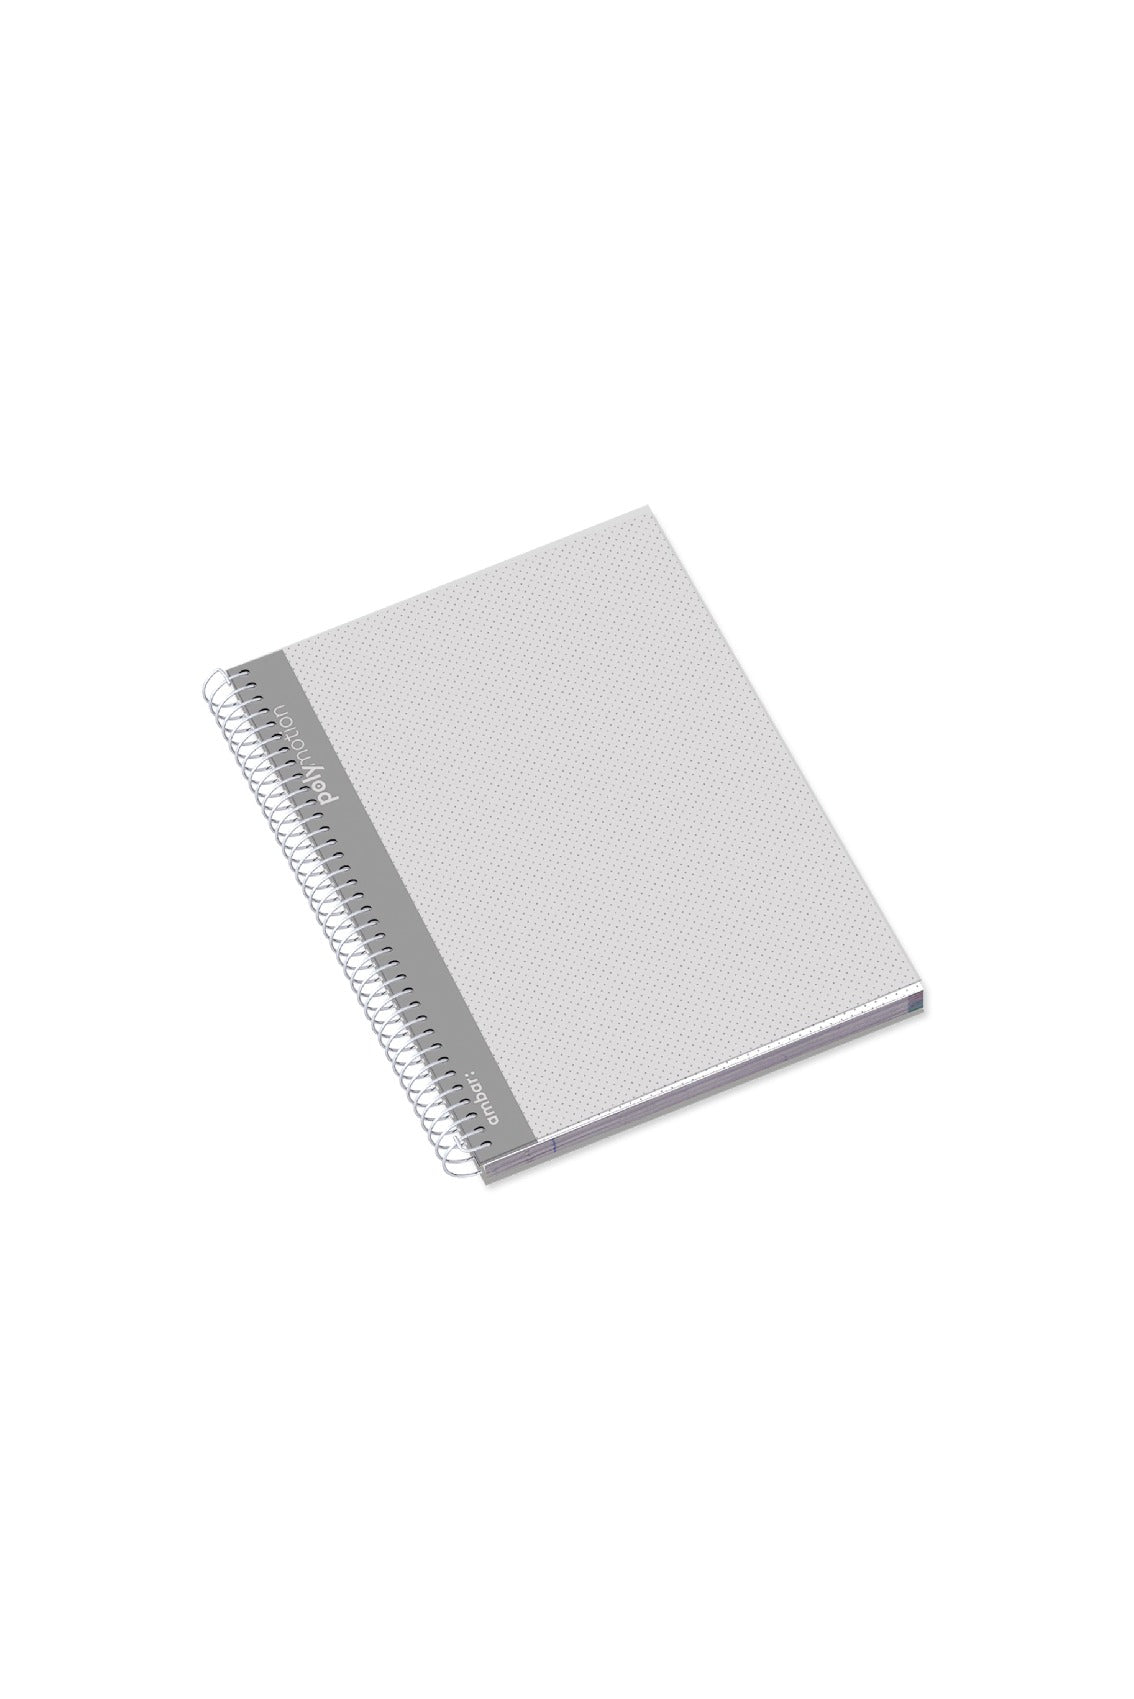 A4 Spiral Book Polipro Squared 120 Sheets 